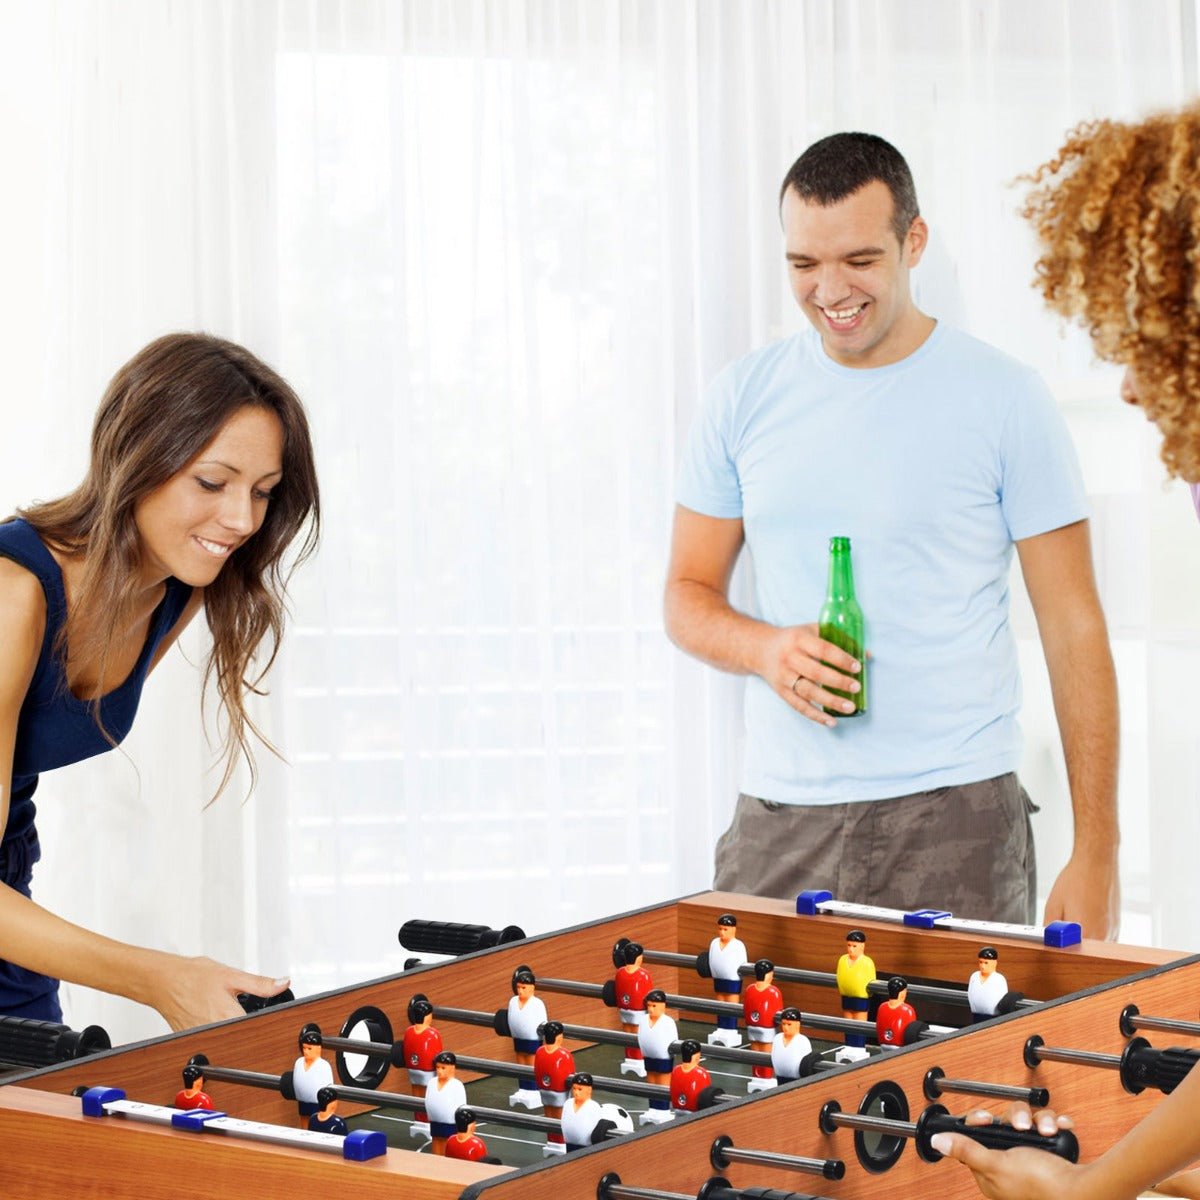 Enjoy Competitive Play with the Folding Foosball Table